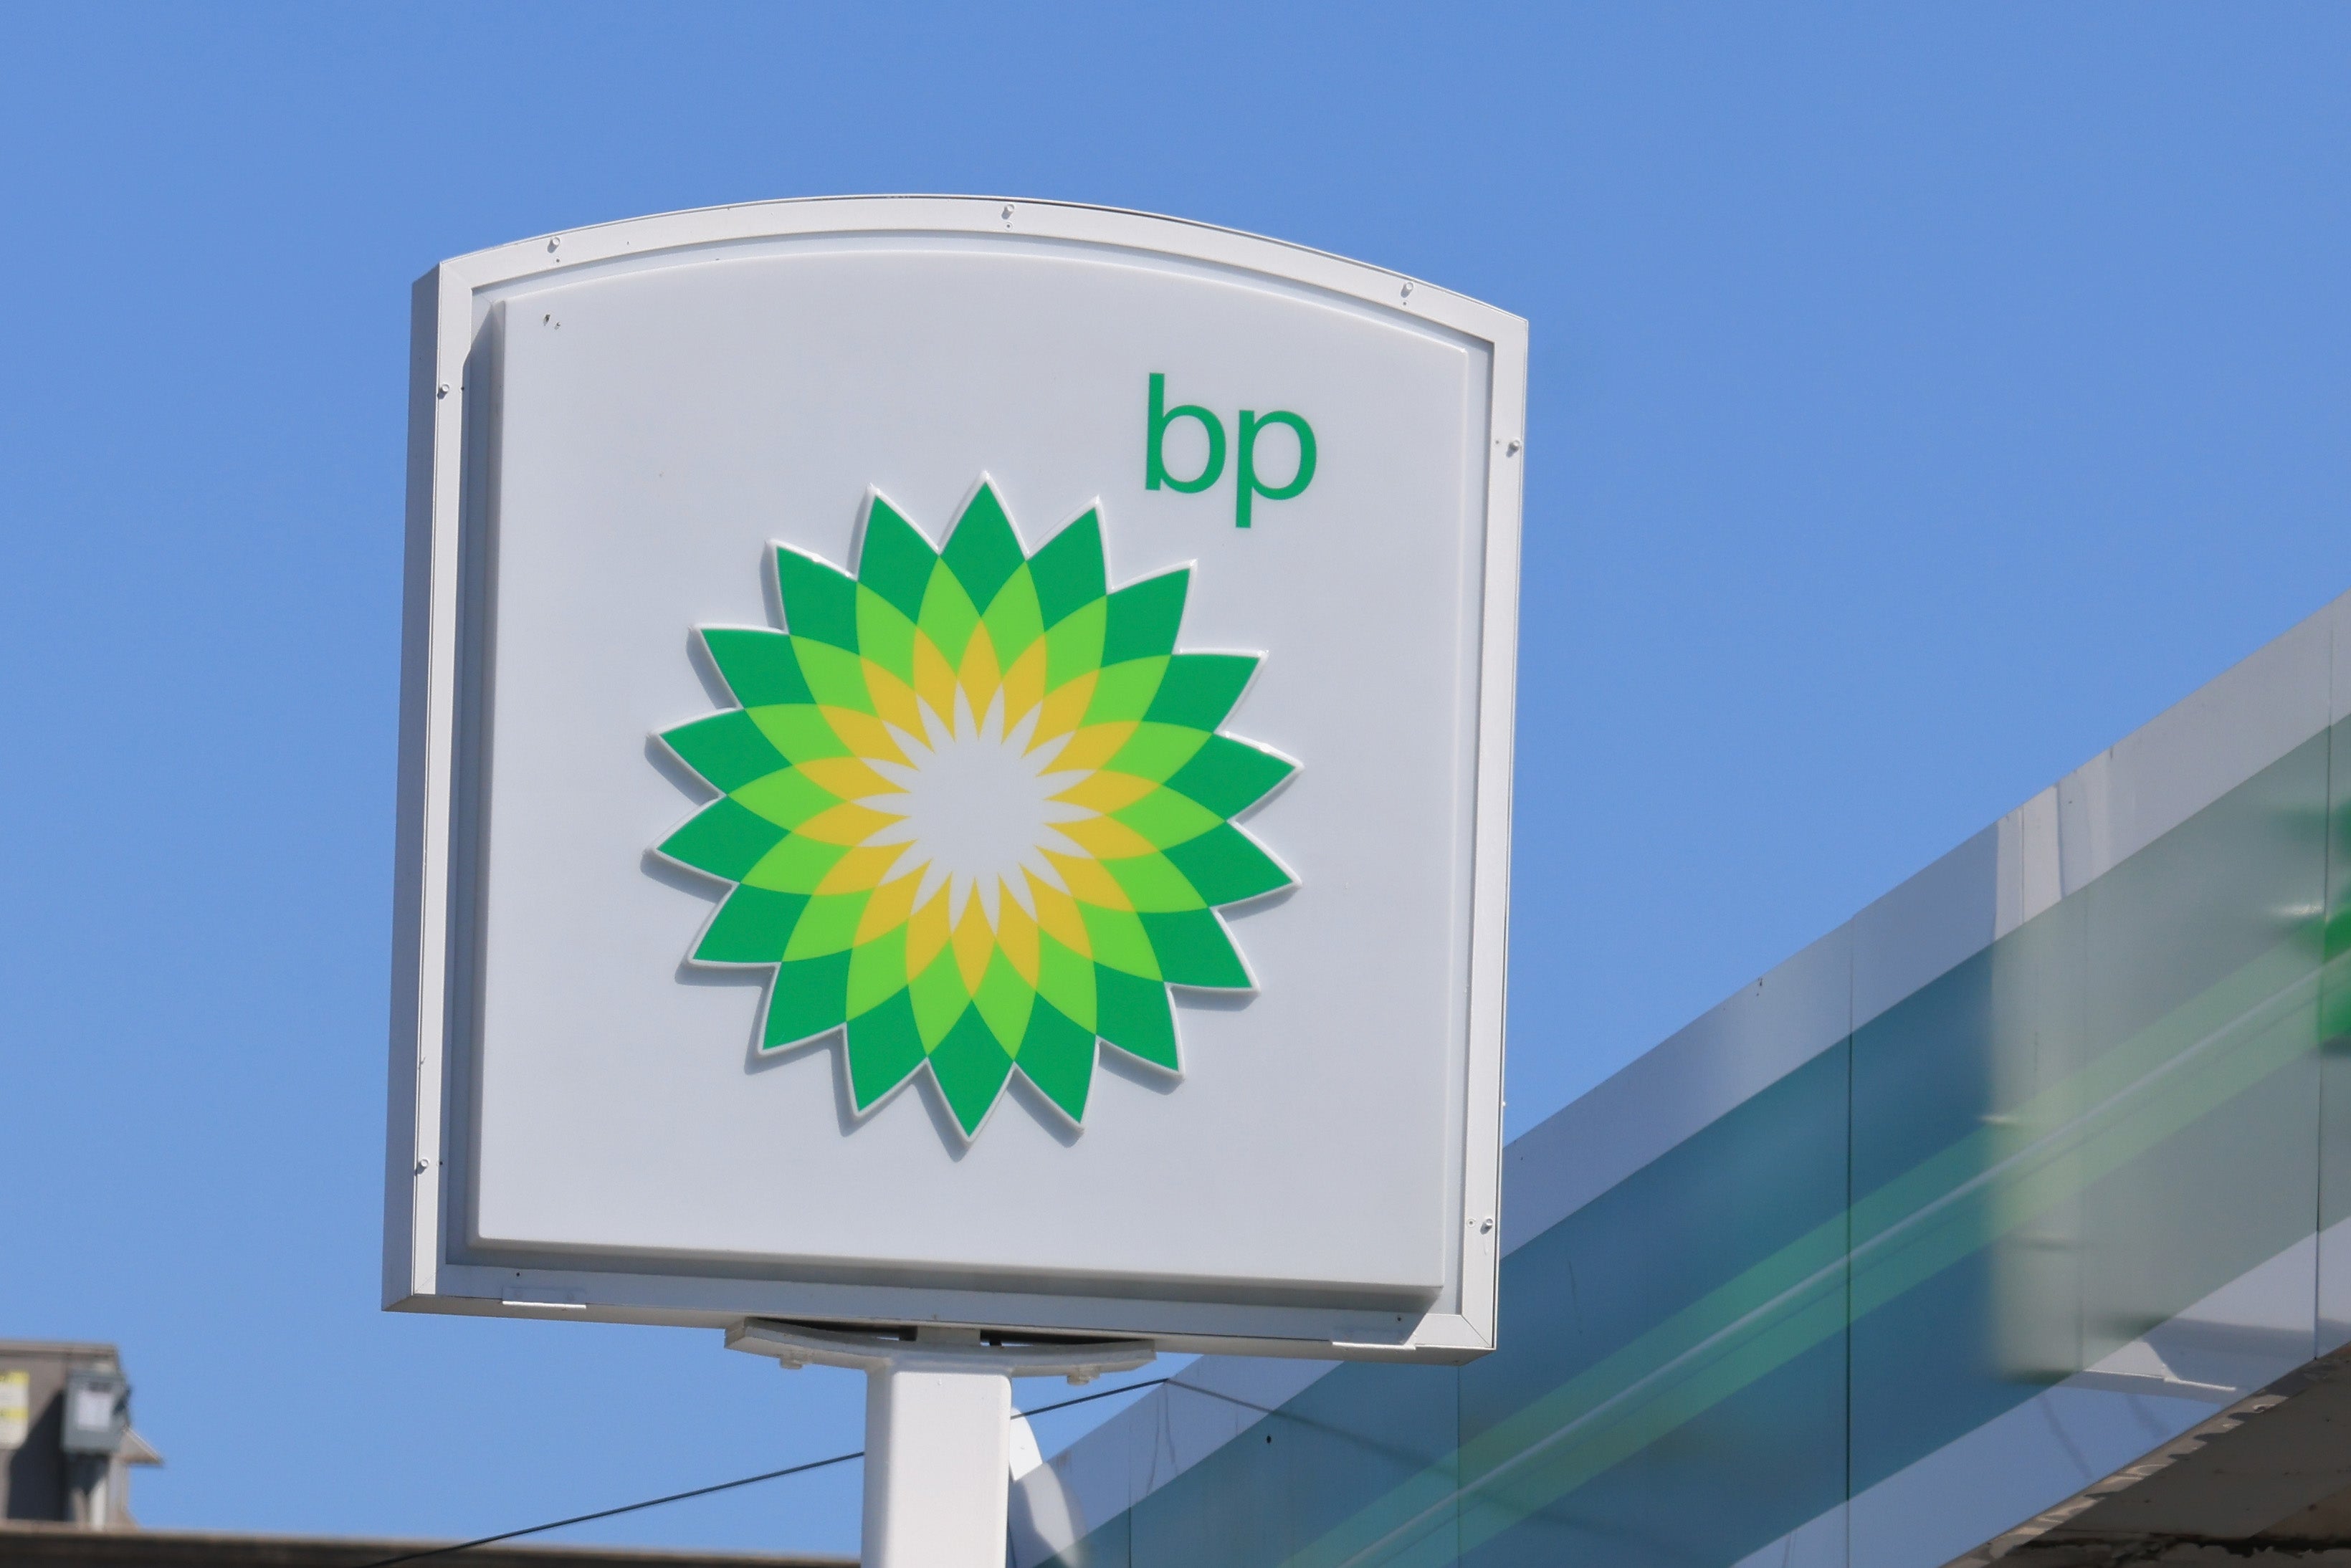 Tyler Loudon’s wife worked at BP when he committed insider trading, the SEC complaint said